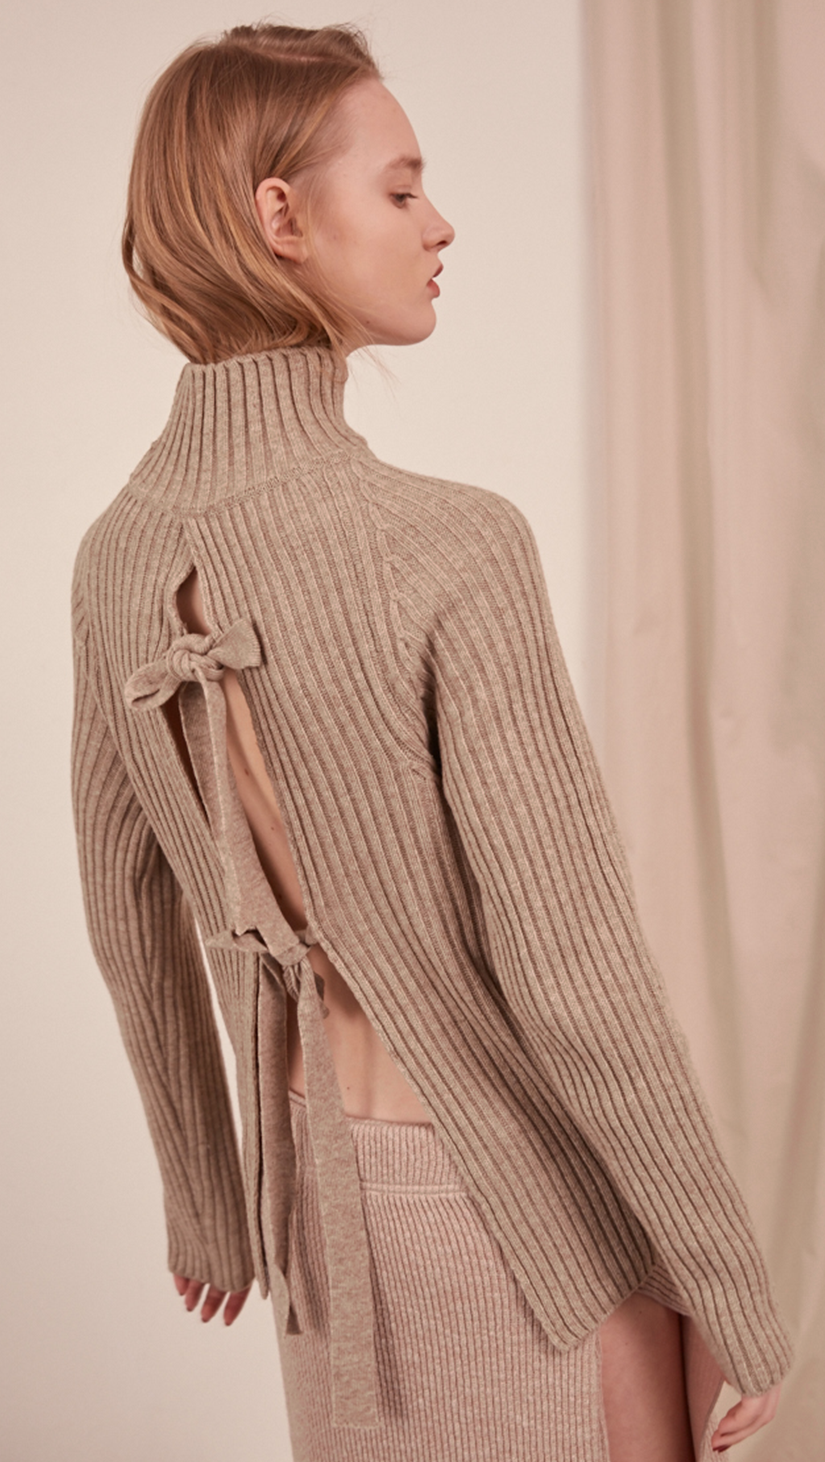 The Simona Knit in oatmeal. Features long sleeve, open back detail in cotton self-tie, ribbed turtleneck. Pull on. Slim fit.